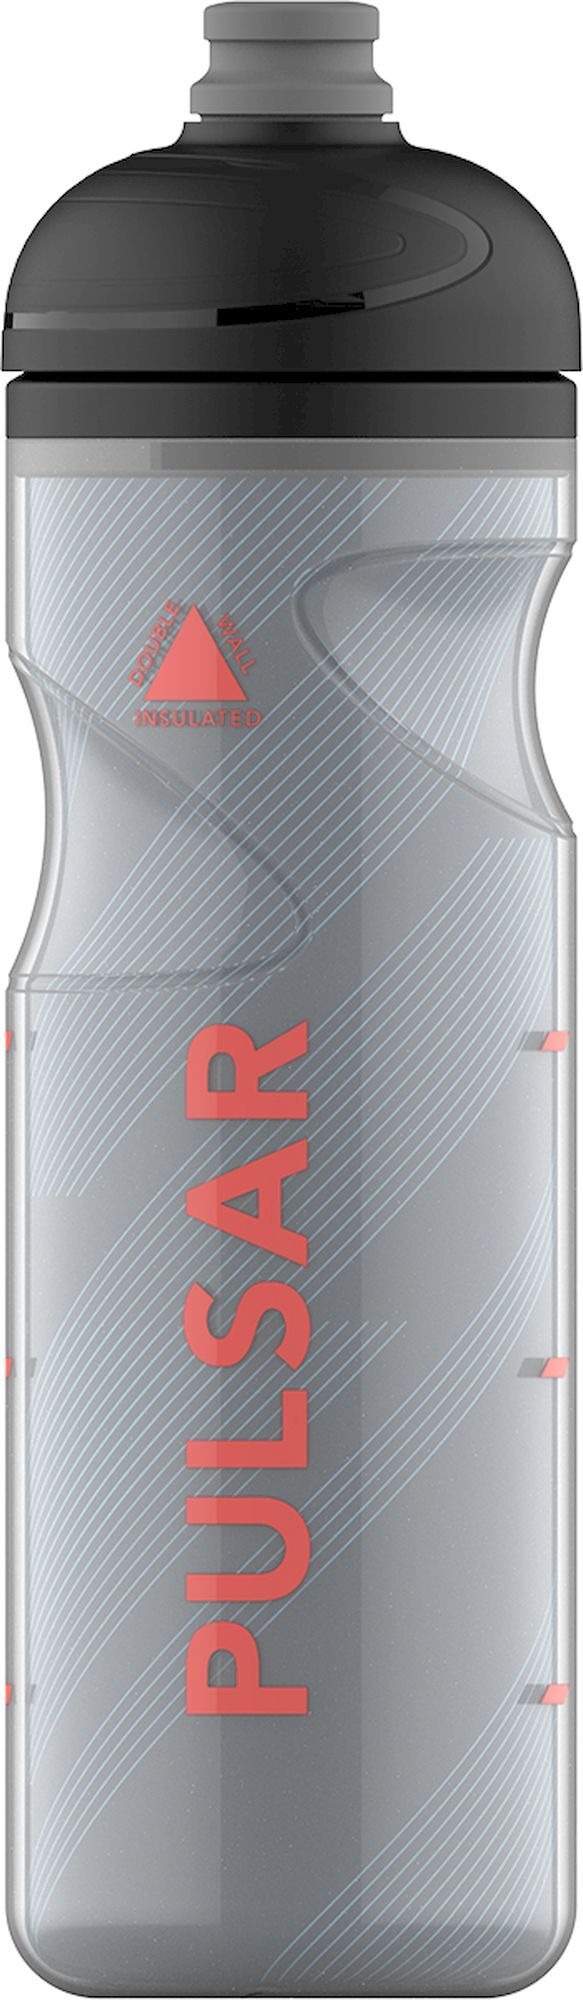 Sigg Pulsar Therm - Bouteille isotherme | Hardloop